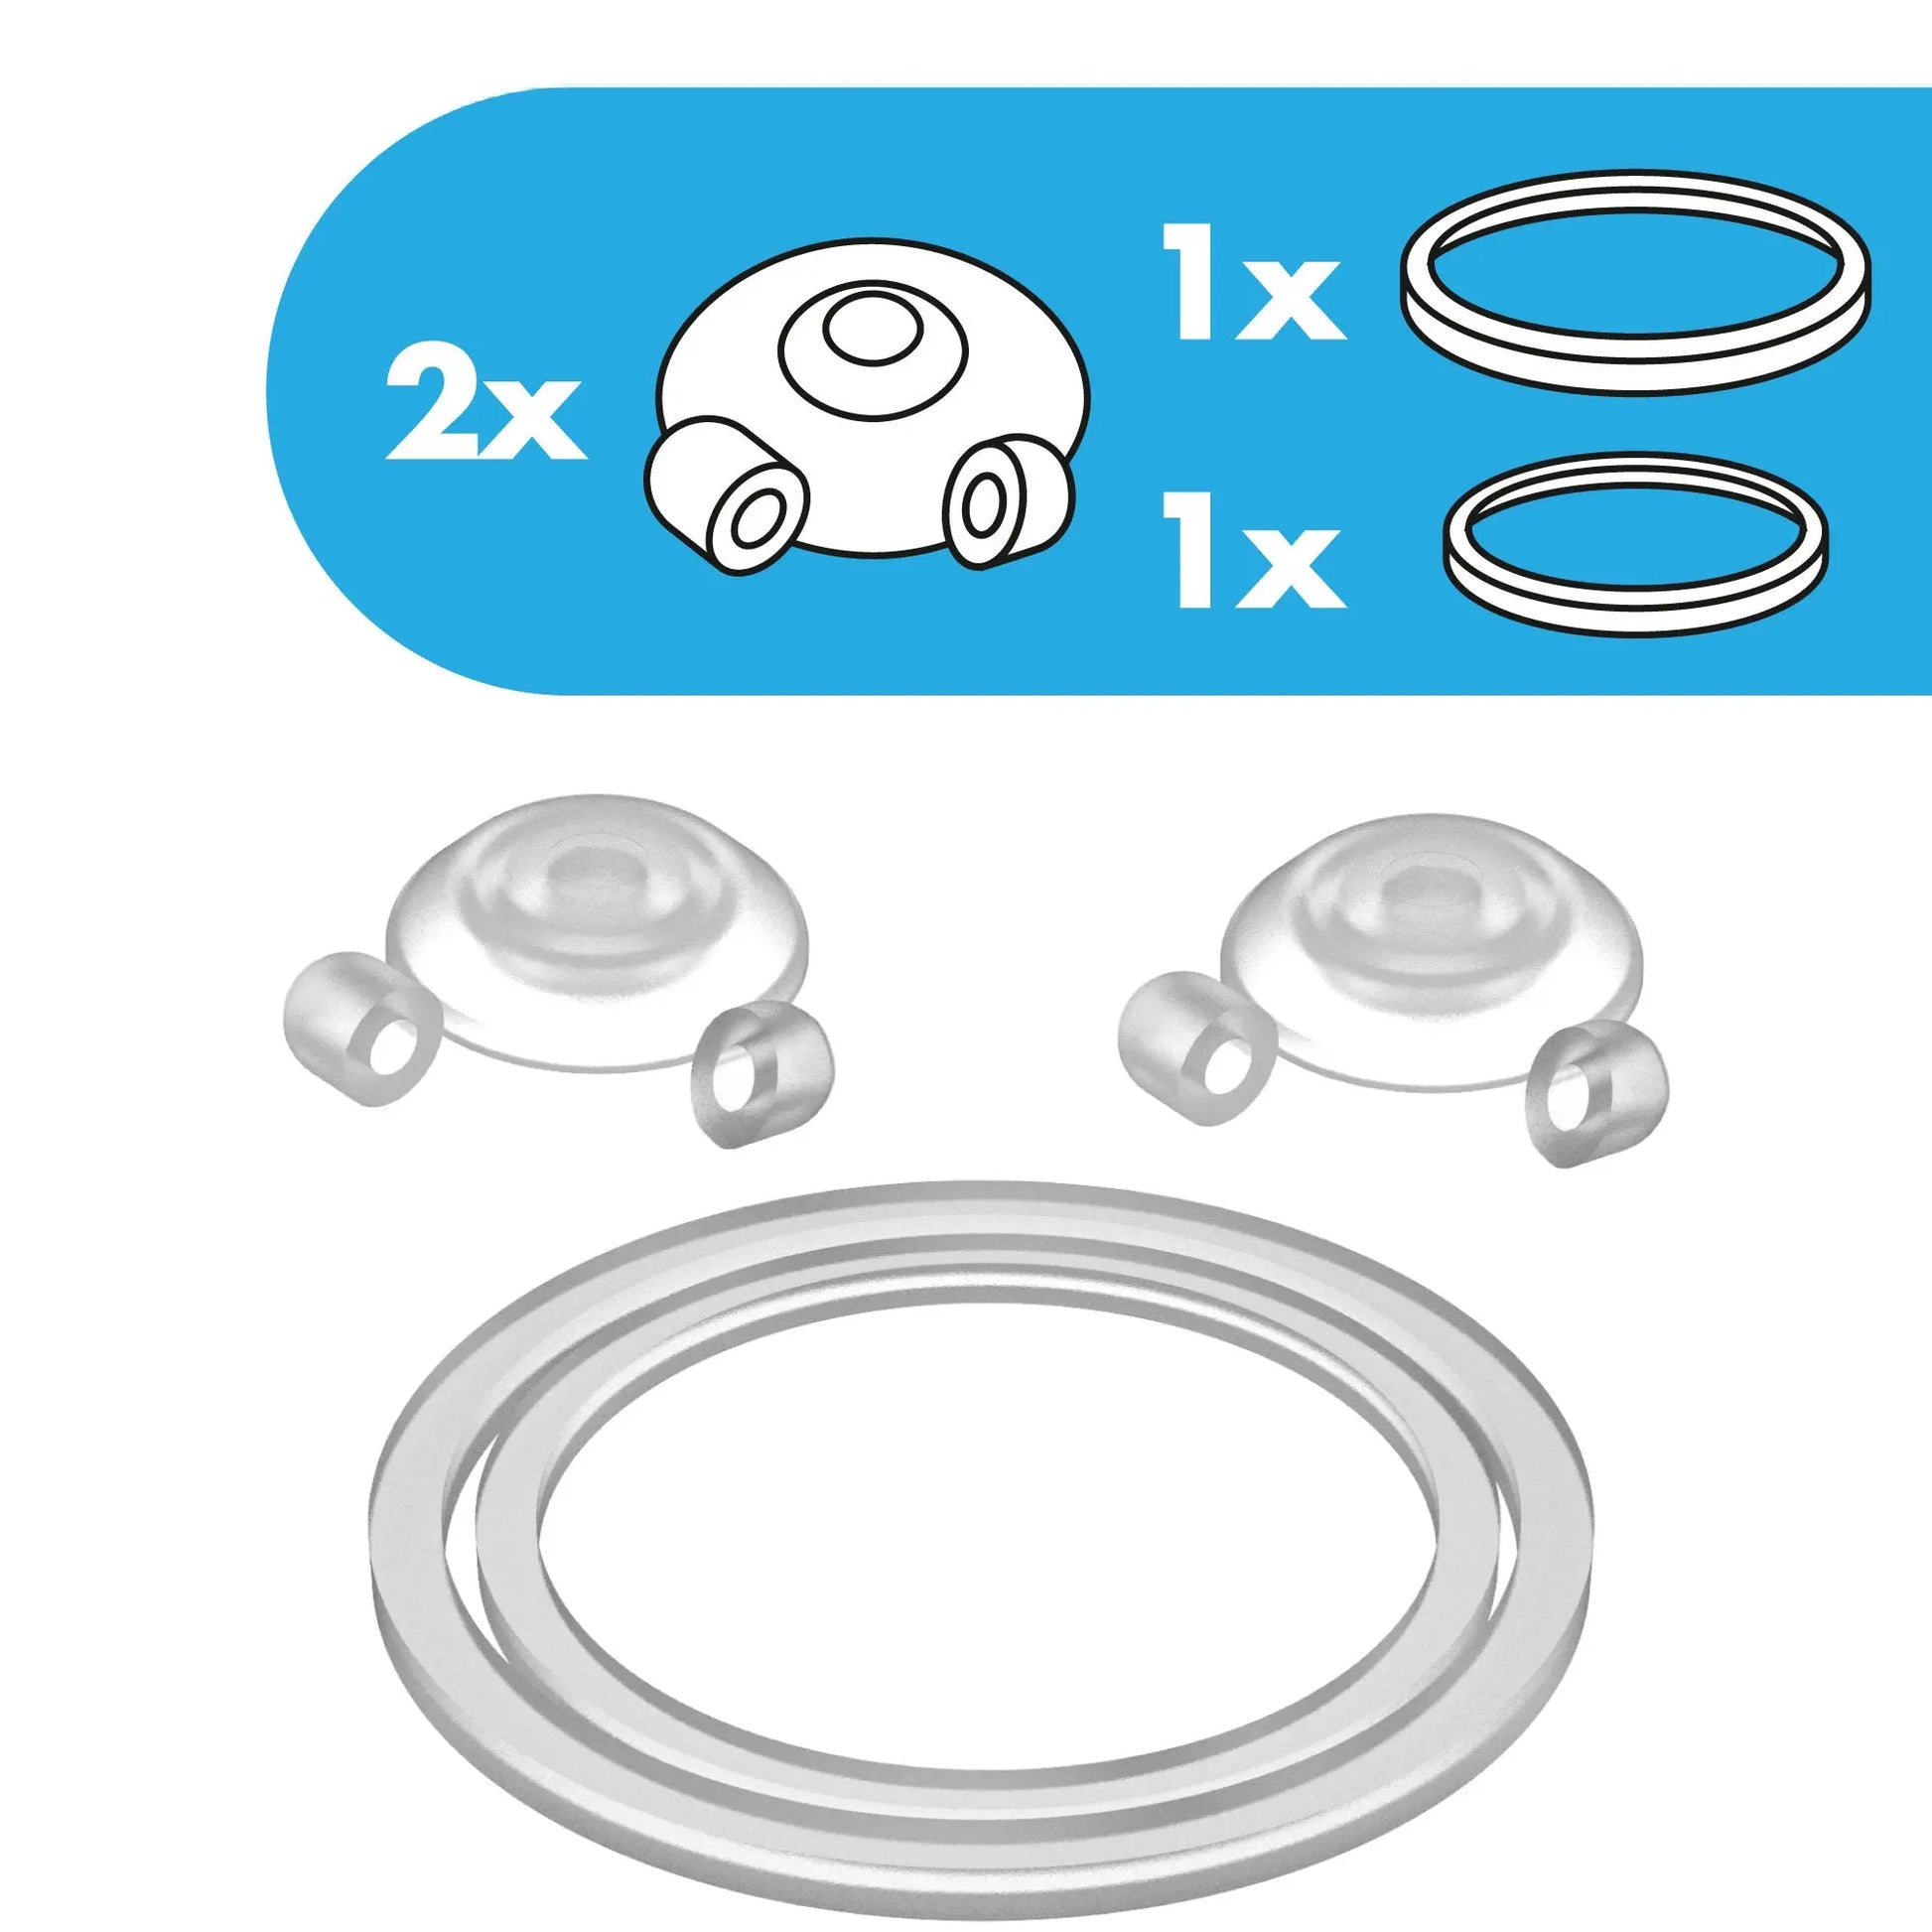 Leak Proof Water Bottle Accessory, Replacement 1.0 & 2.0 Seals - ION8